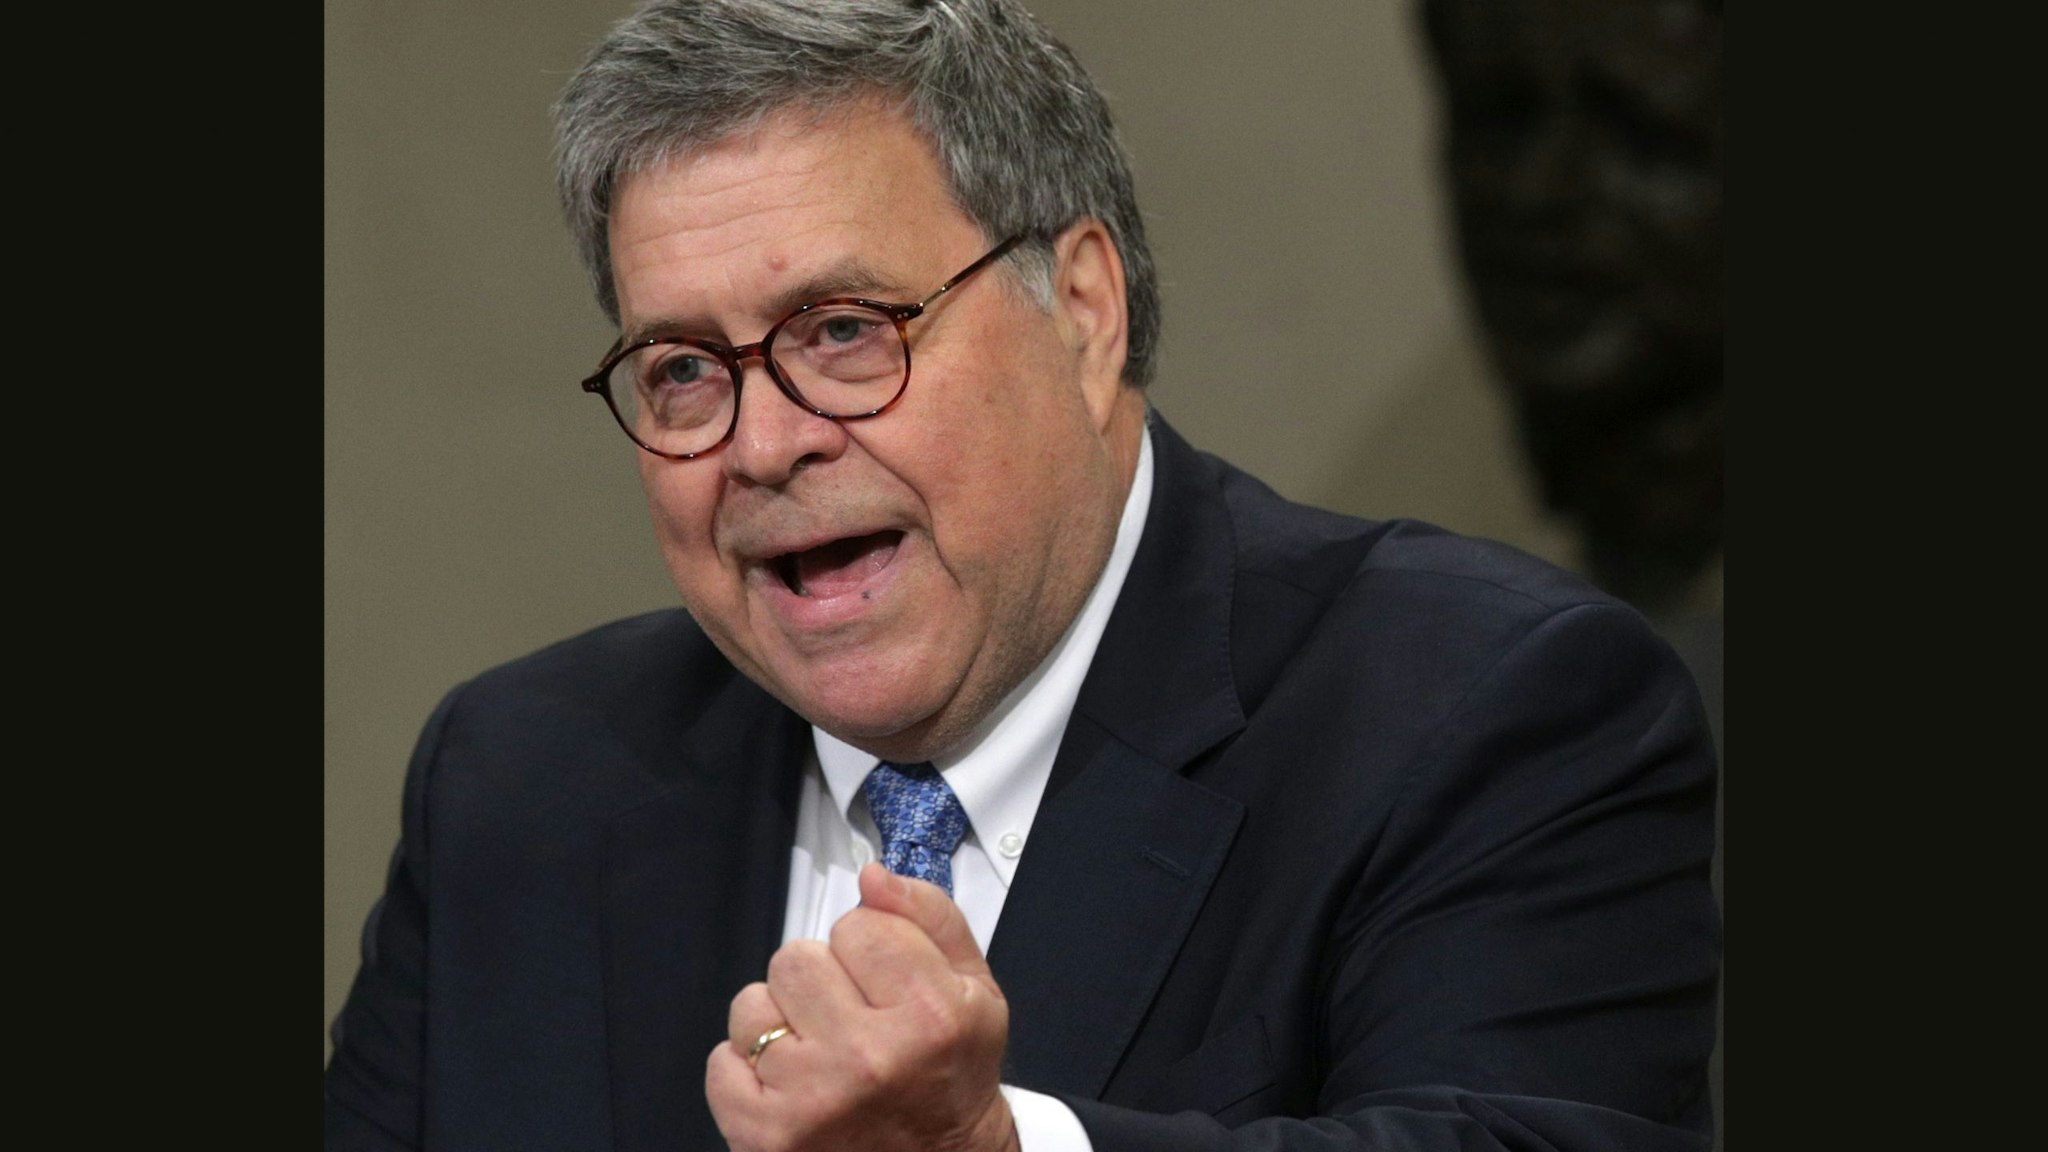 WASHINGTON, DC - JULY 15: U.S. Attorney General William Barr speaks during a "Combating Anti-Semitism Summit" at the Justice Department July 15, 2019 in Washington, DC. Administration officials and Jewish leaders are participating in the summit to discuss ways to combat anti-semitism.